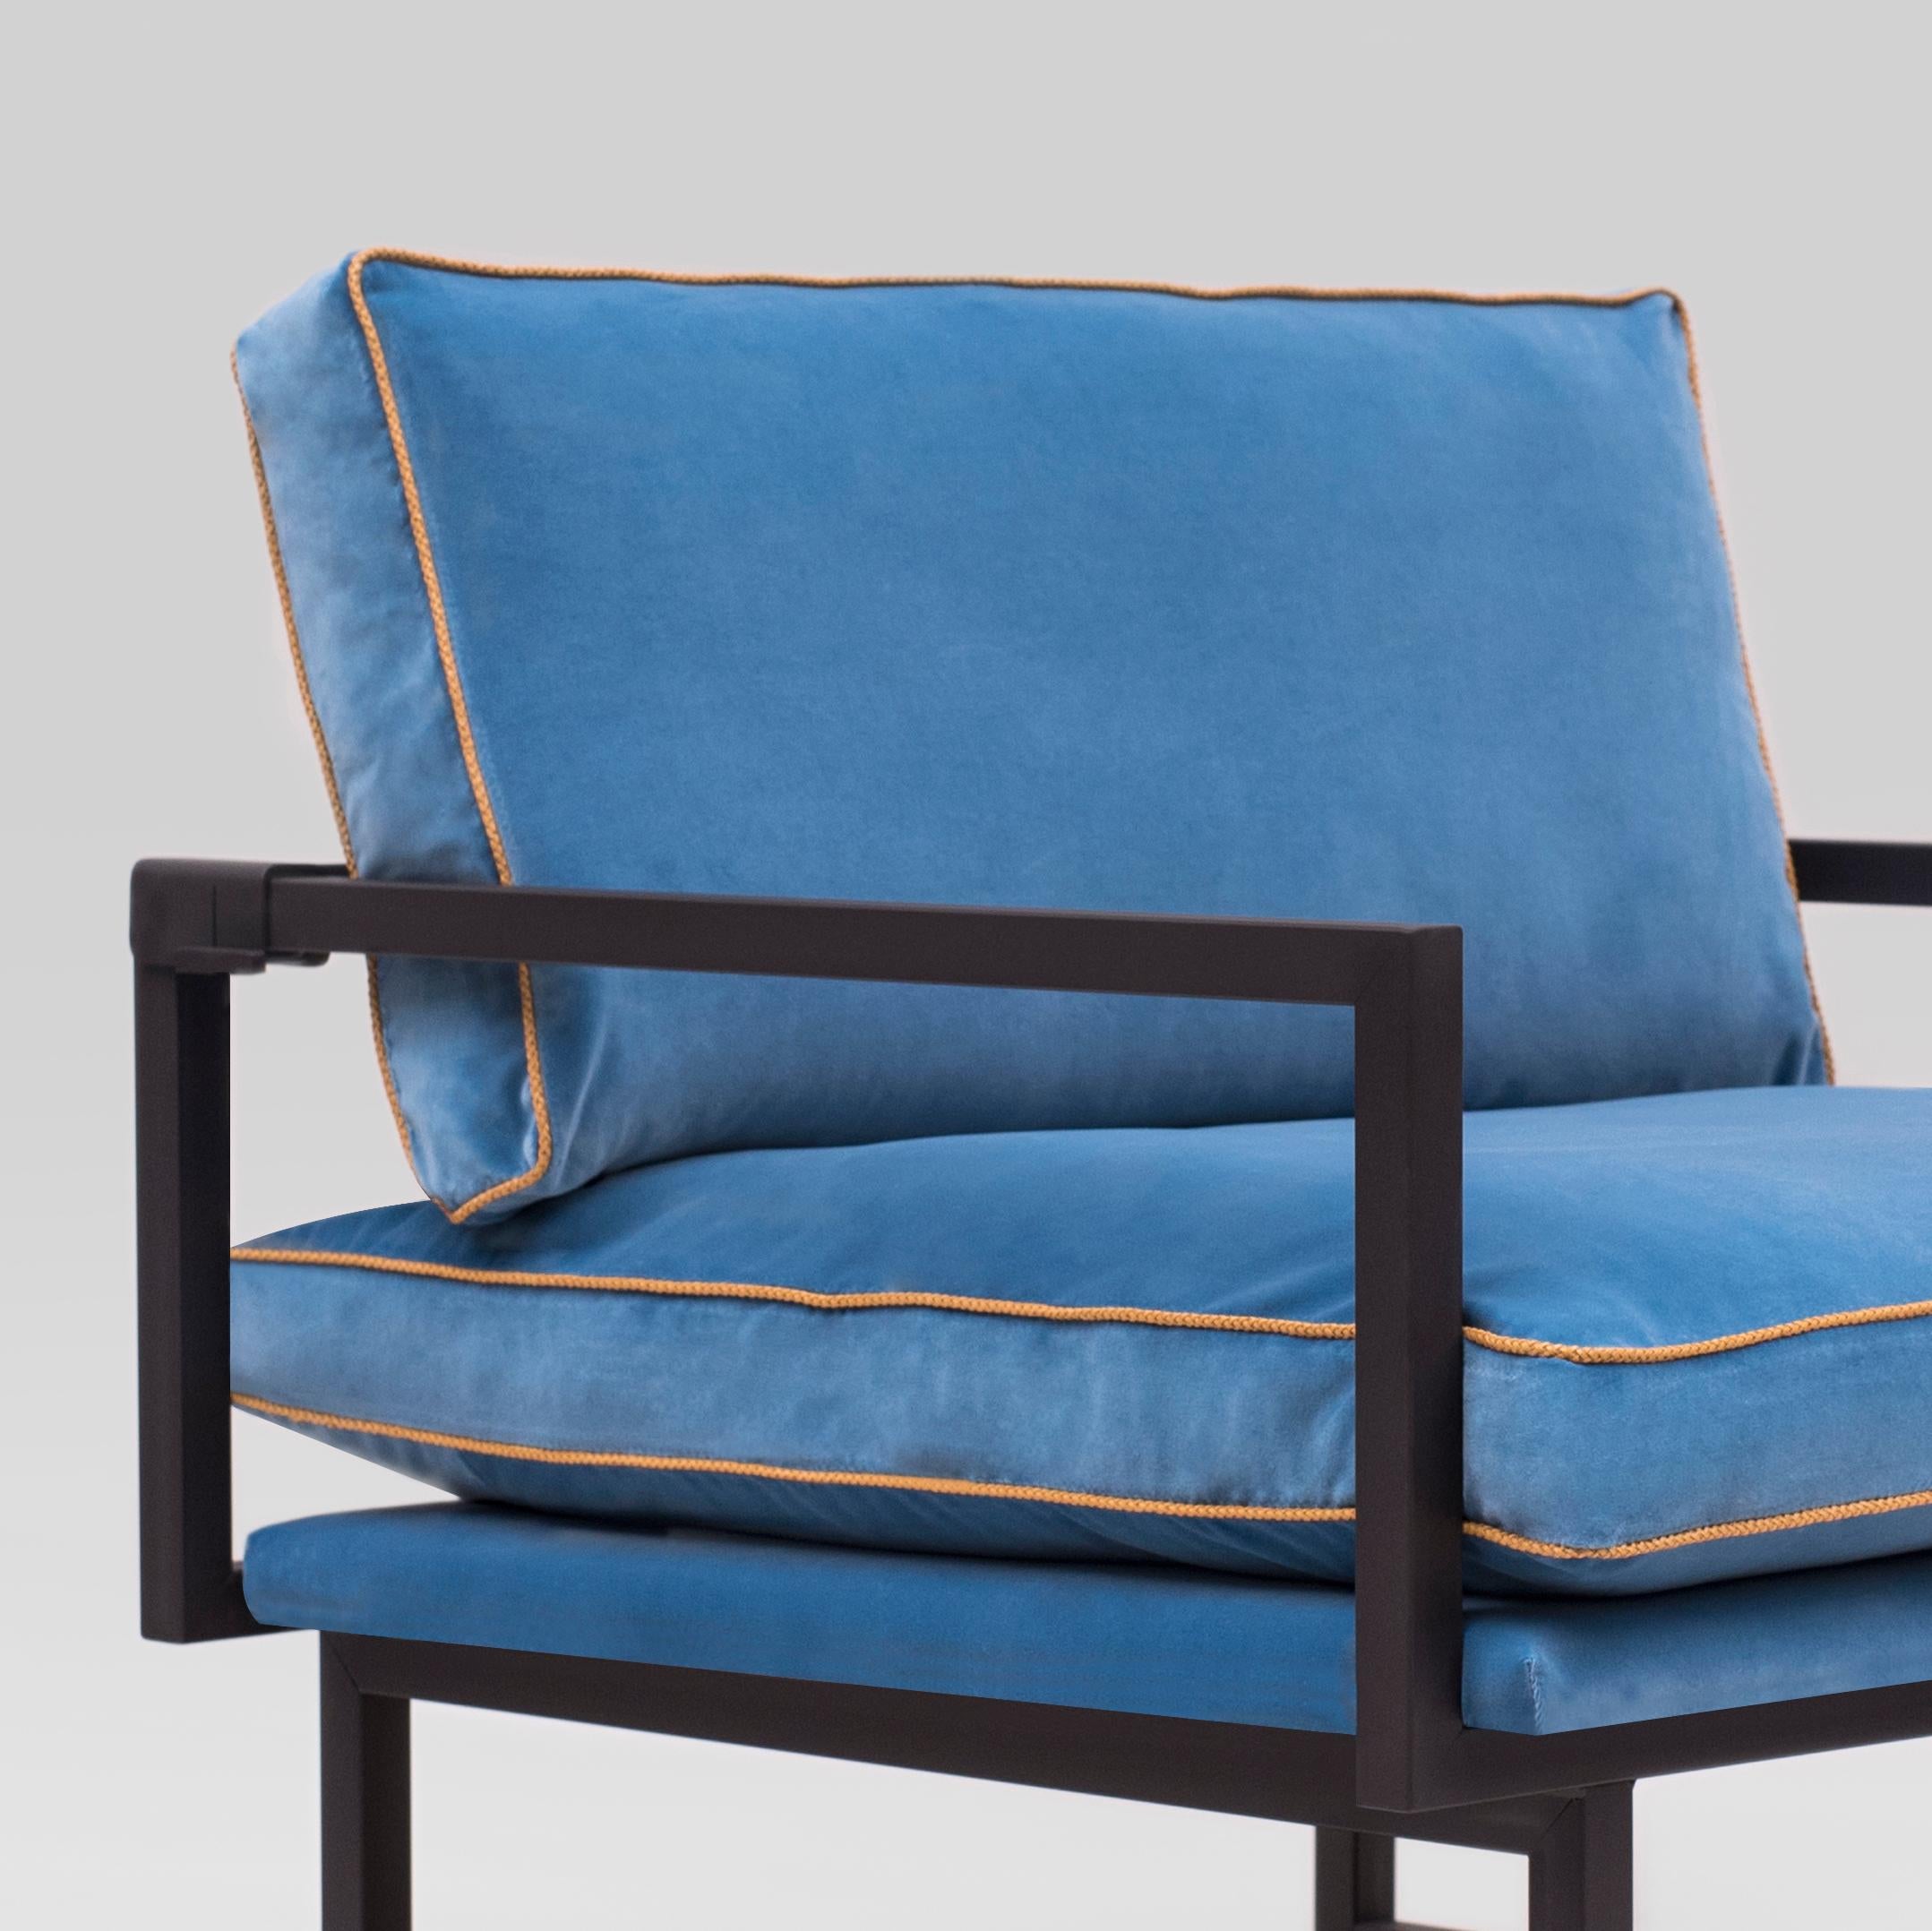 Armchair designed by Peter Ghyczy.
Manufactured by Ghyczy (Netherlands)

Frame charcoal
Fabric A&E143 (Q5)
Piping D ‘own color’

Dimensions:
L 86 x W 90 x SH 41 


This sofa has an airy and light weight architectural construction. The